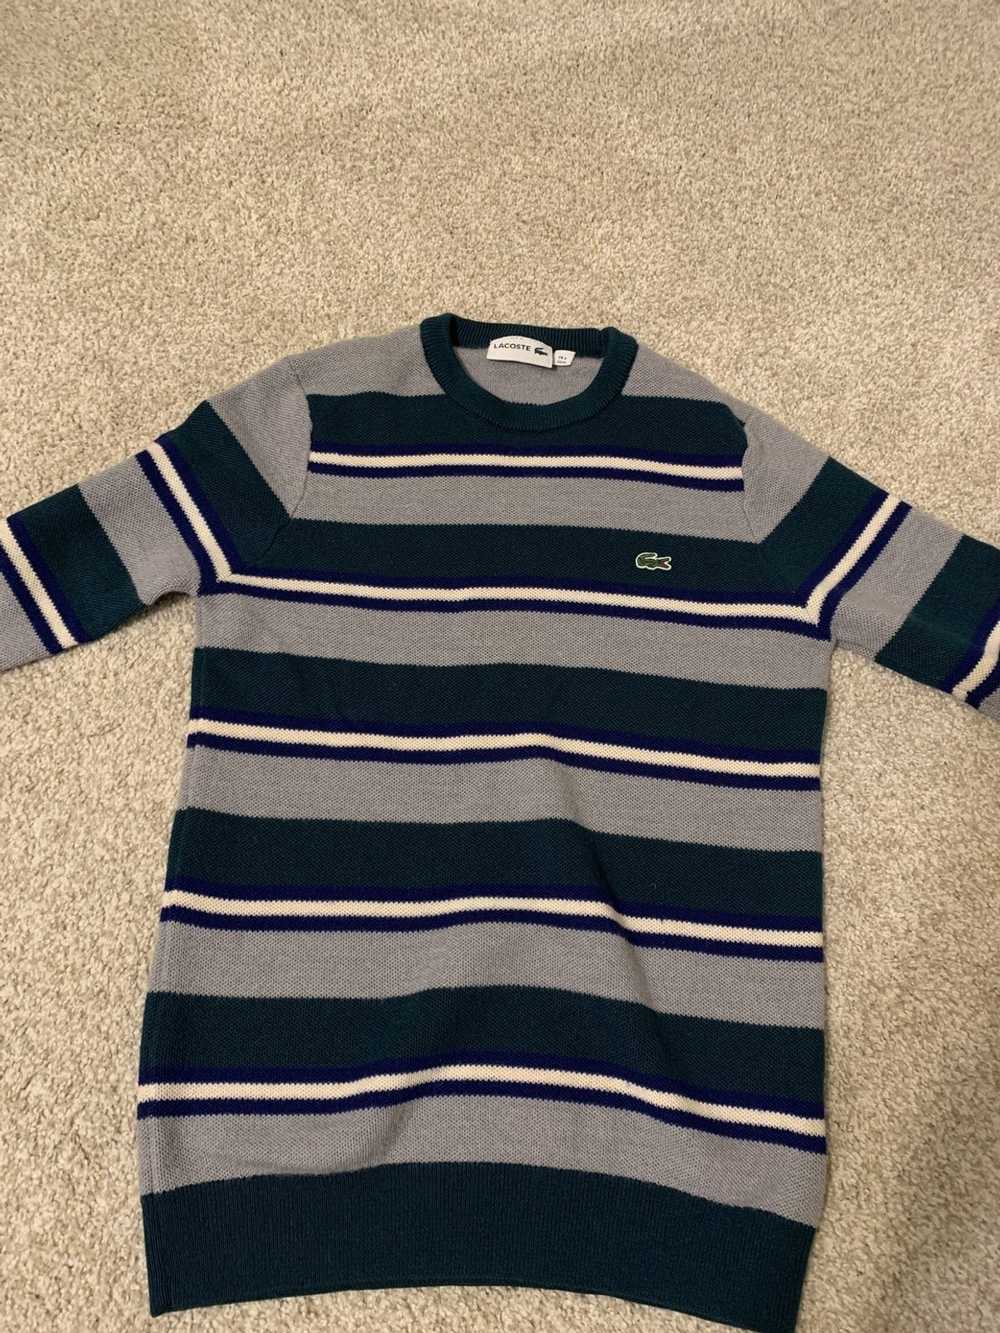 Lacoste Striped Lacoste Sweater - image 1